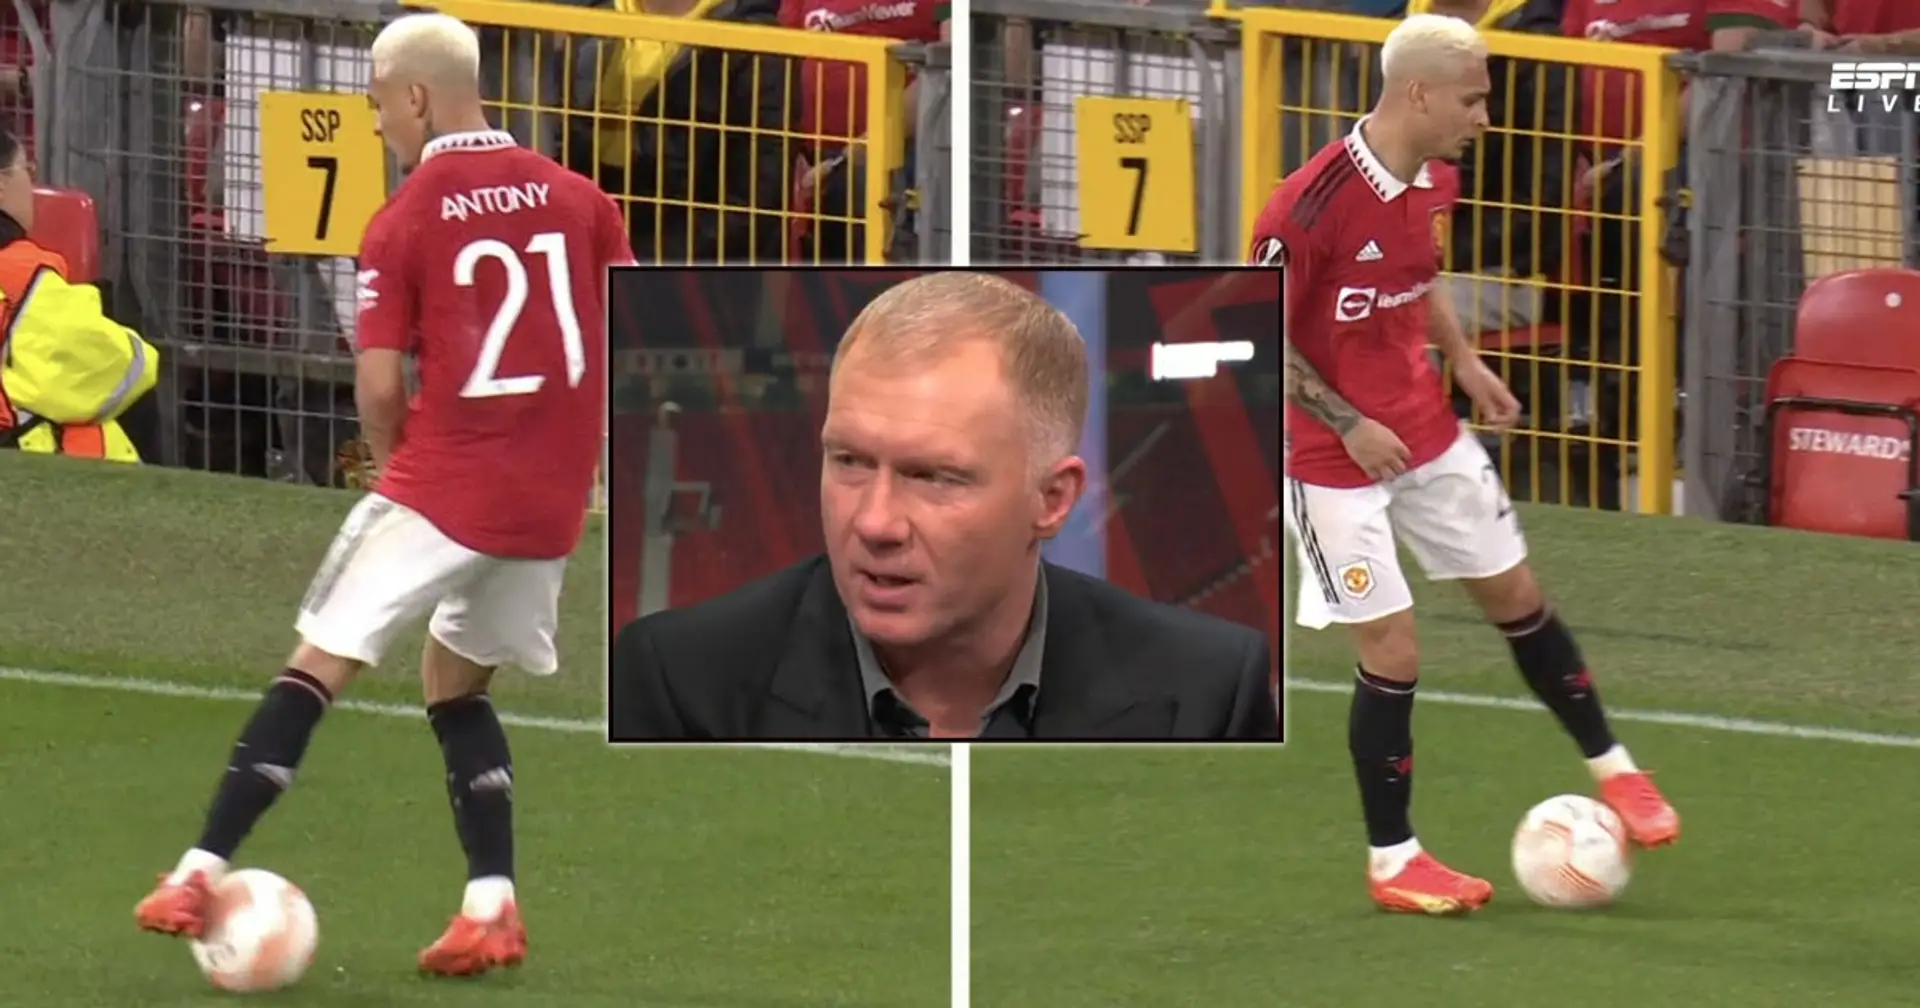 ‘He needs that knocking out of him’: Scholes slams Antony for turning skill vs Sheriff